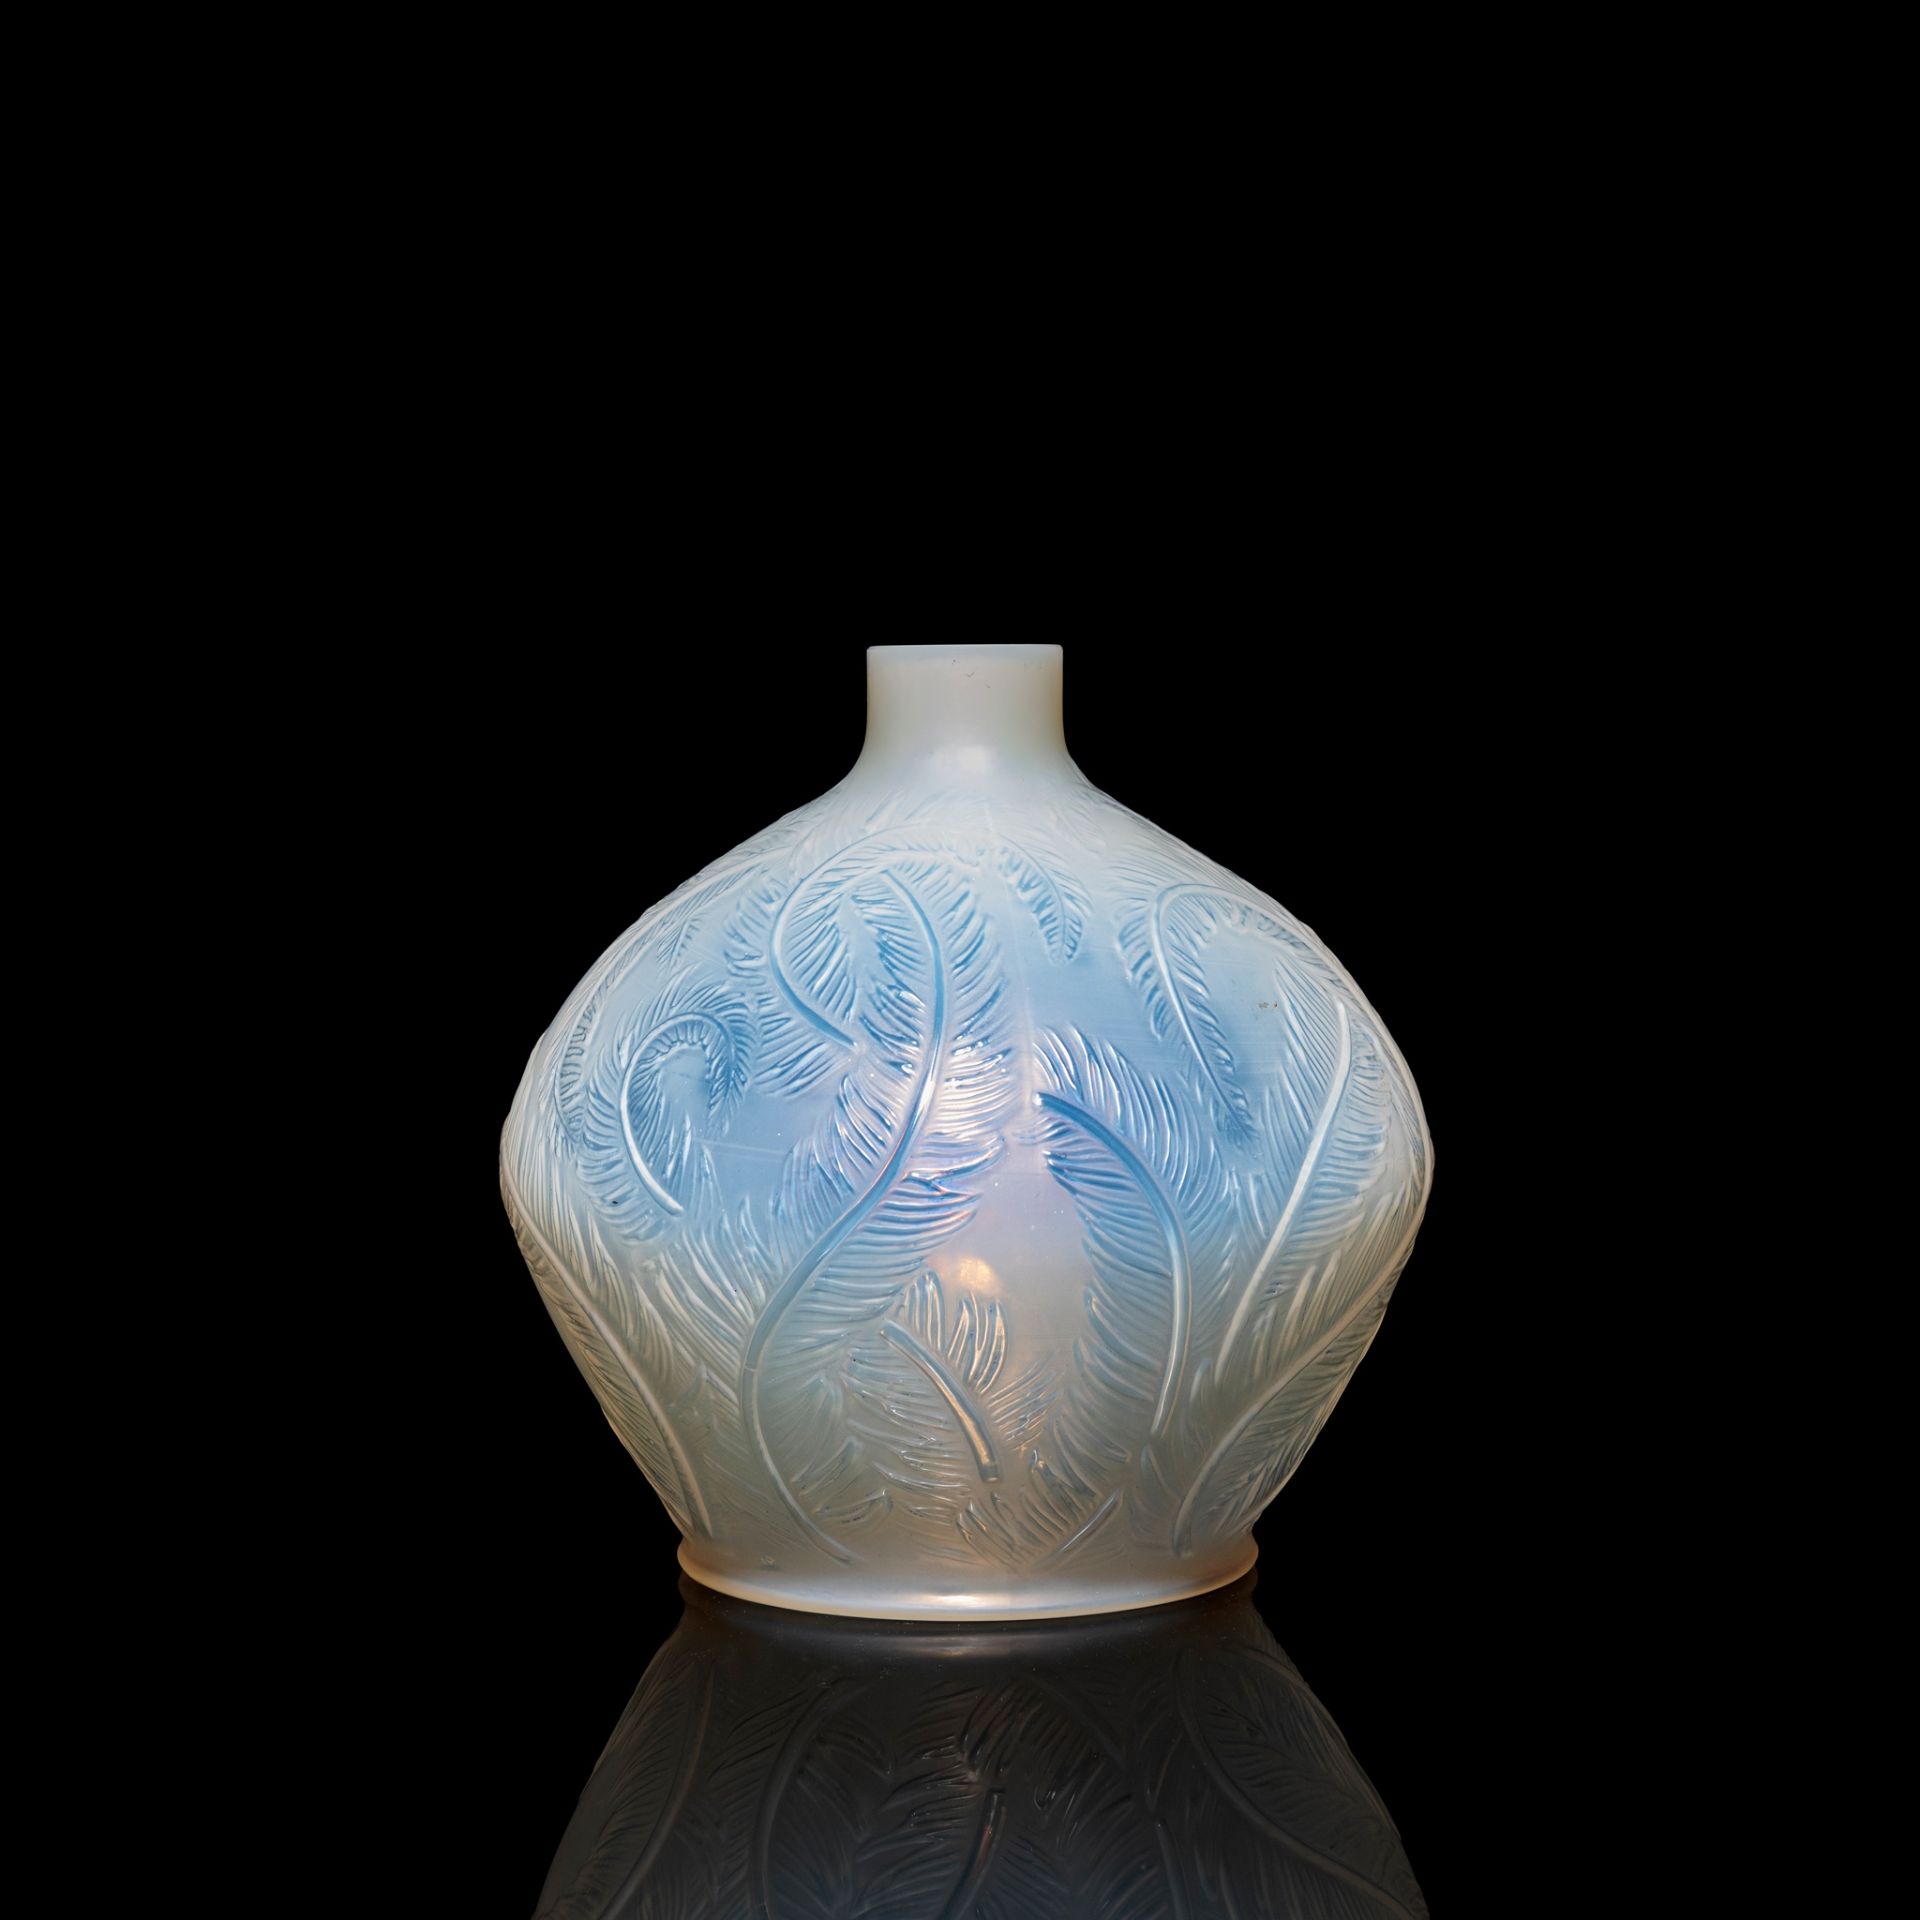 ‡ RENÉ LALIQUE (FRENCH 1860-1945) PLUMES VASE, NO. 944 - Image 2 of 2